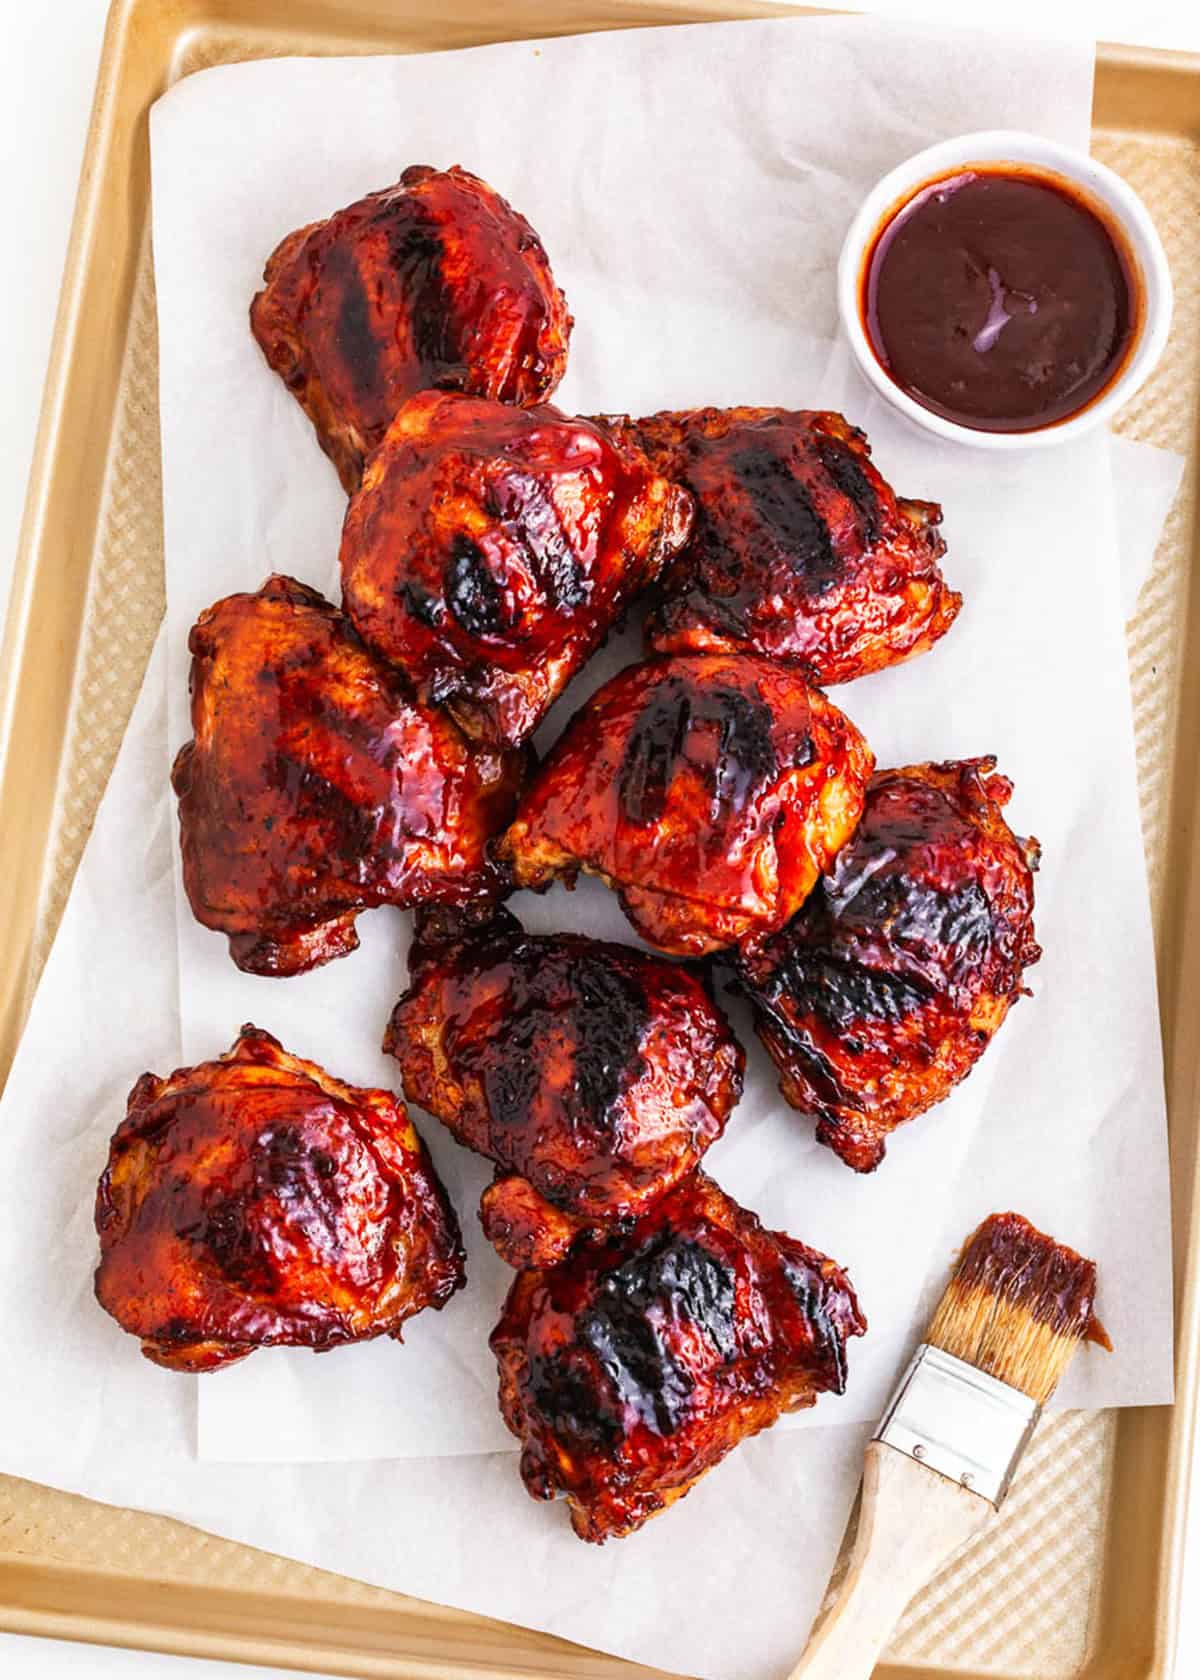 Grilled BBQ chicken on a paper lined baking sheet with bowl of sauce and basting brush.